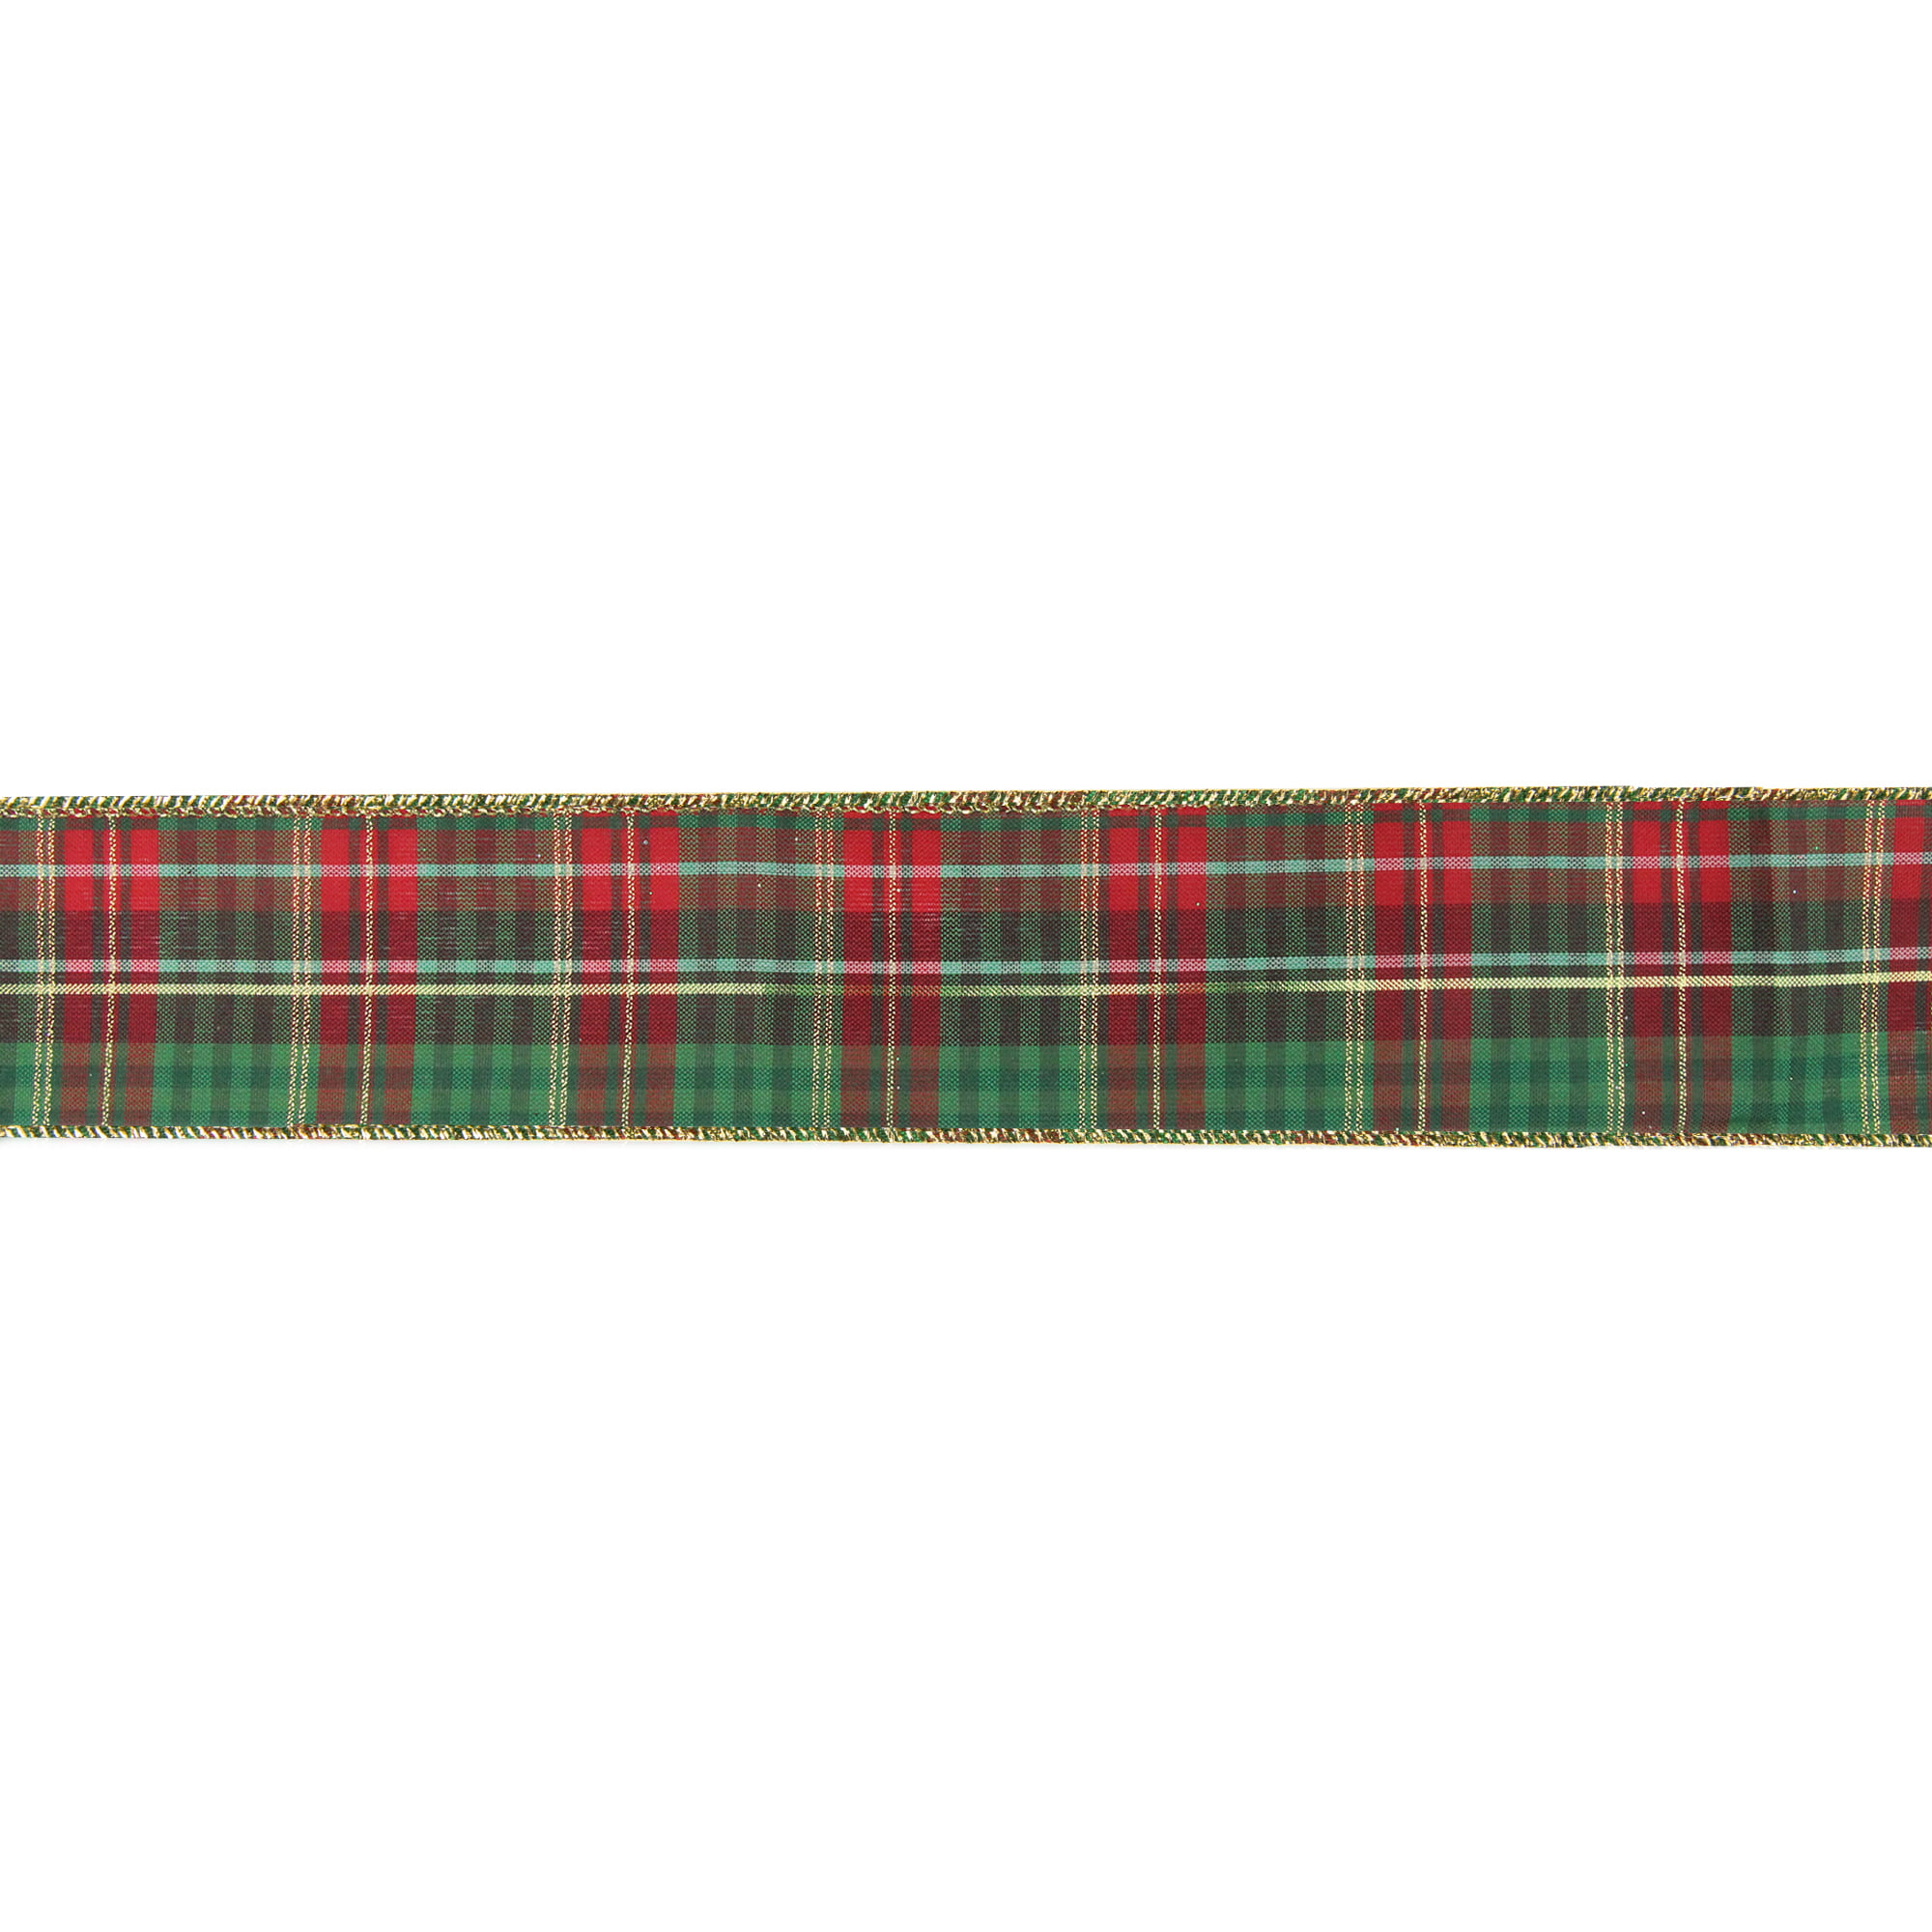 10yd Roll 'Red/Green Tartan' Fabric Wire Edge Christmas Ribbon 2.5in Wide 